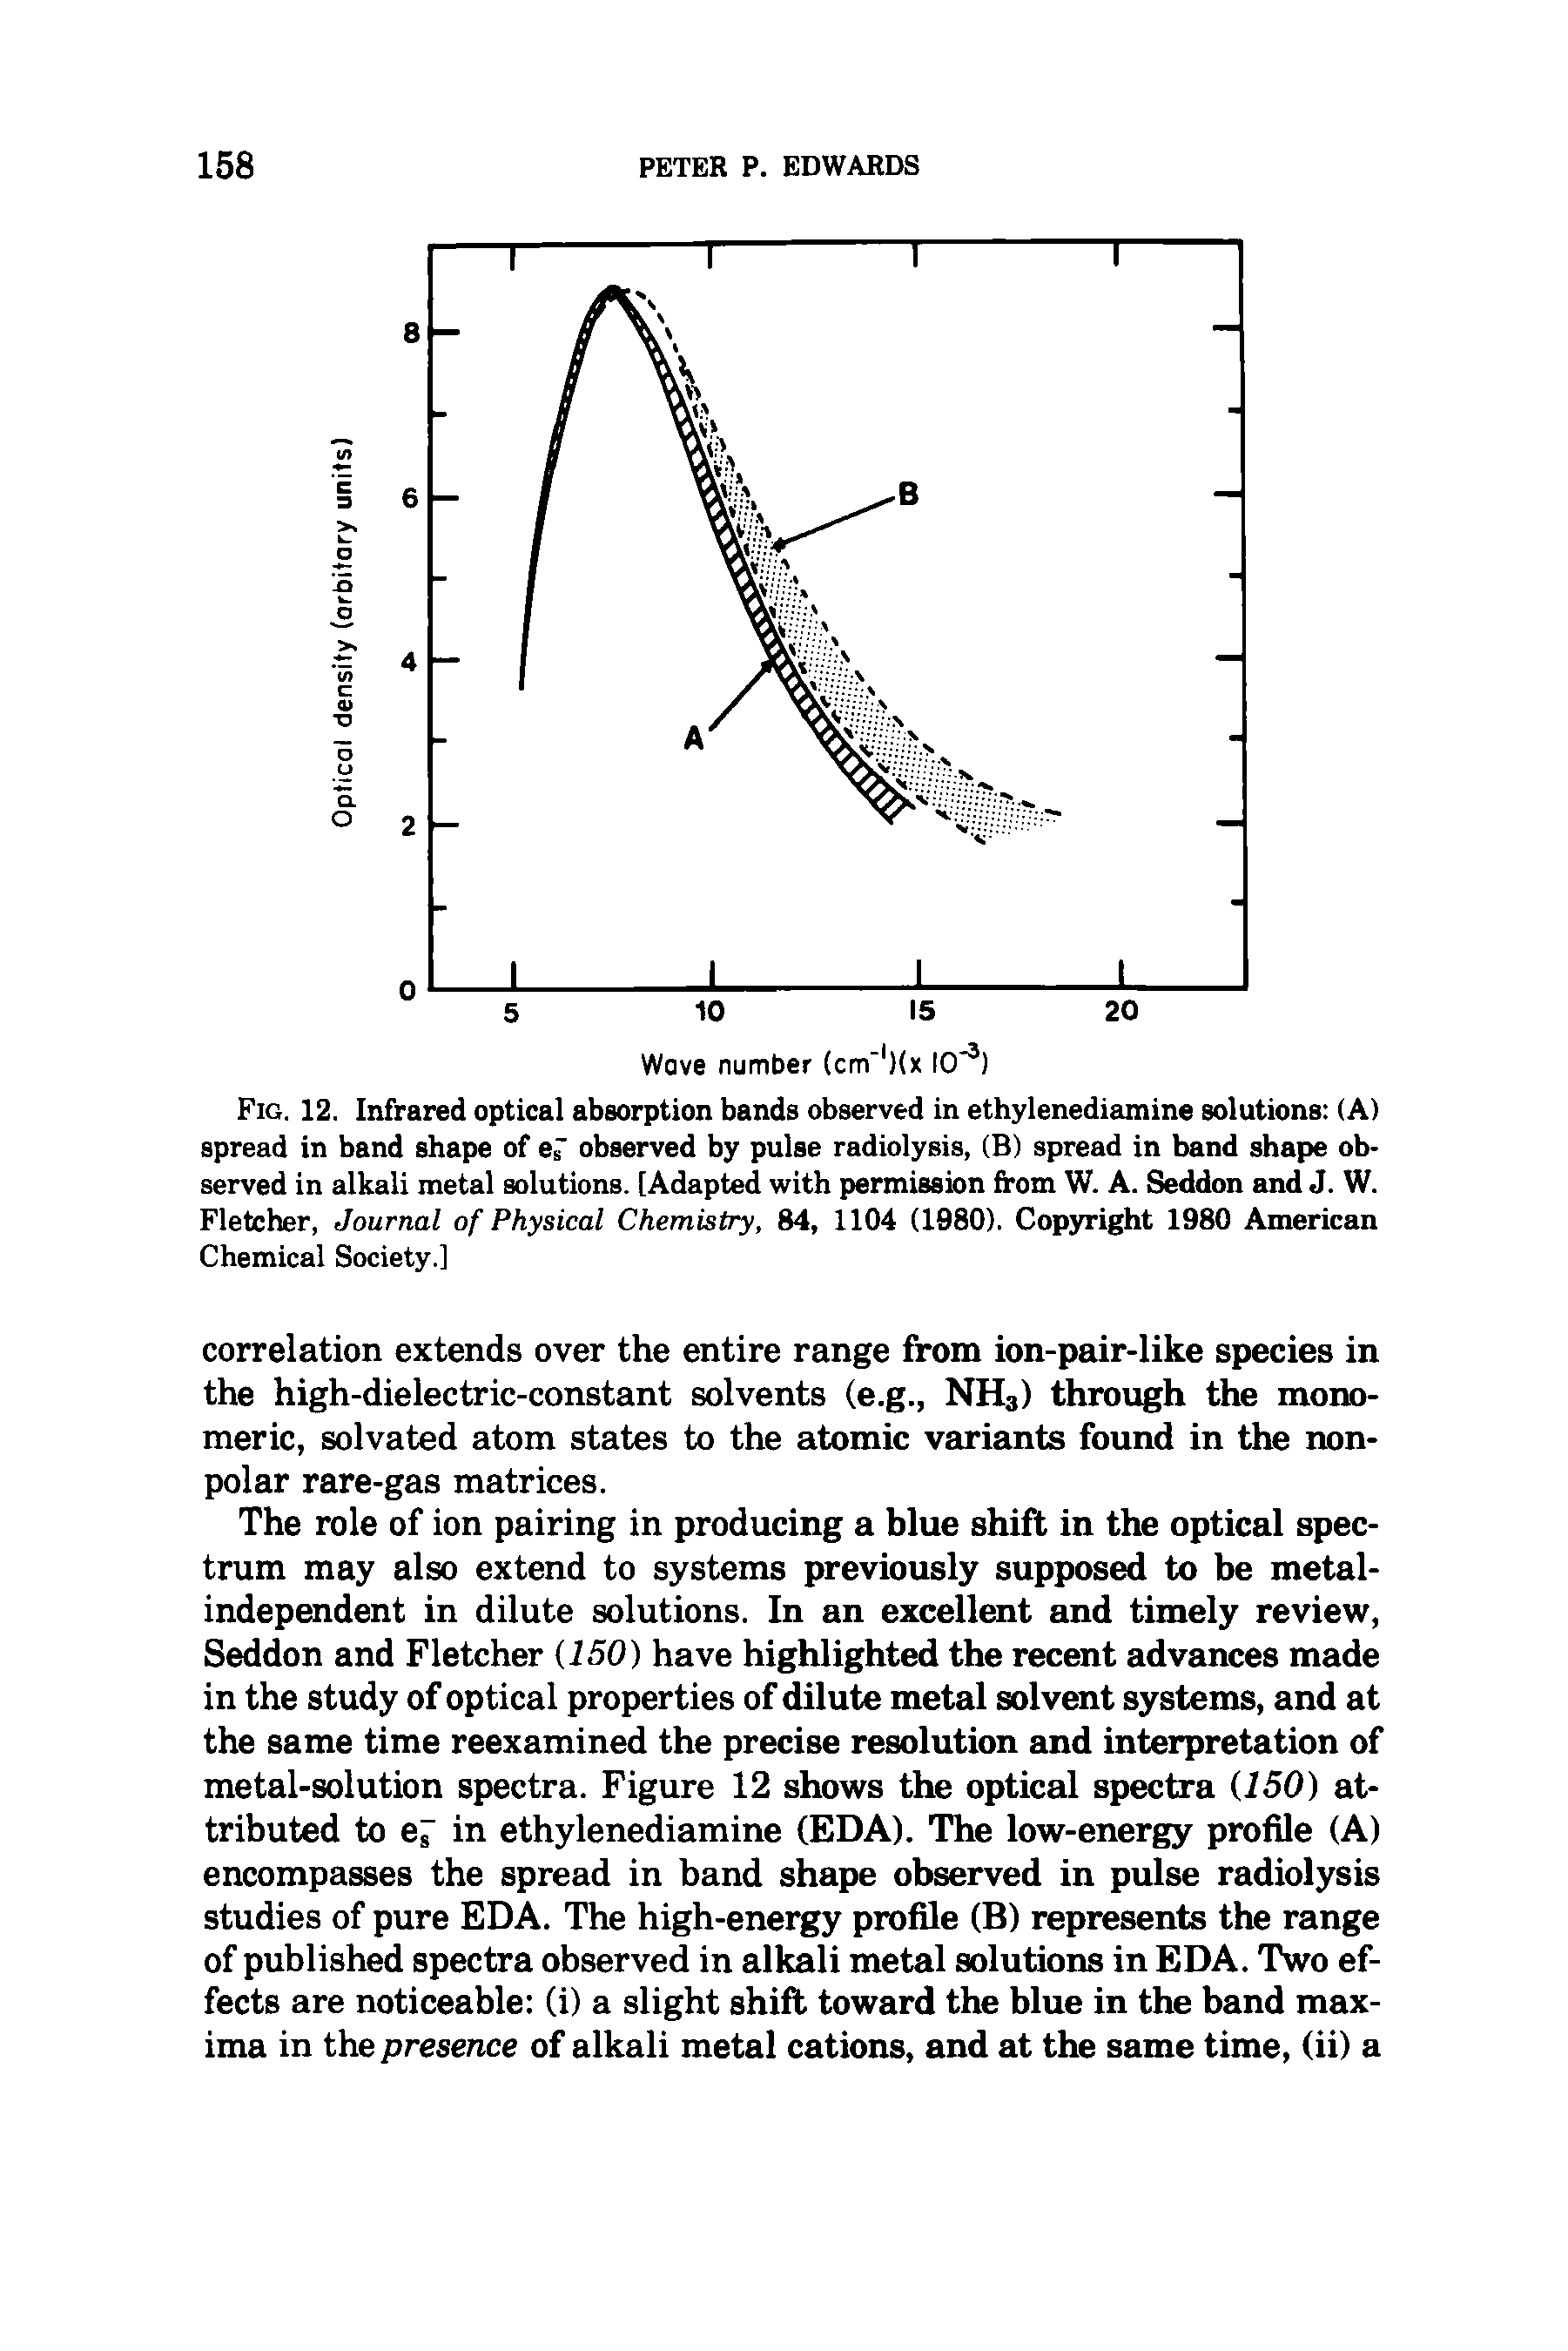 Fig. 12. Infrared optical absorption bands observed in ethylenediamine solutions (A) spread in band shape of er observed by pulse radiolysis, (B) spread in band shape observed in alkali metal solutions. [Adapted with permission from W. A. Seddon and J. W. Fletcher, Journal of Physical Chemistry, 84, 1104 (1980). Copyright 1980 American Chemical Society.]...